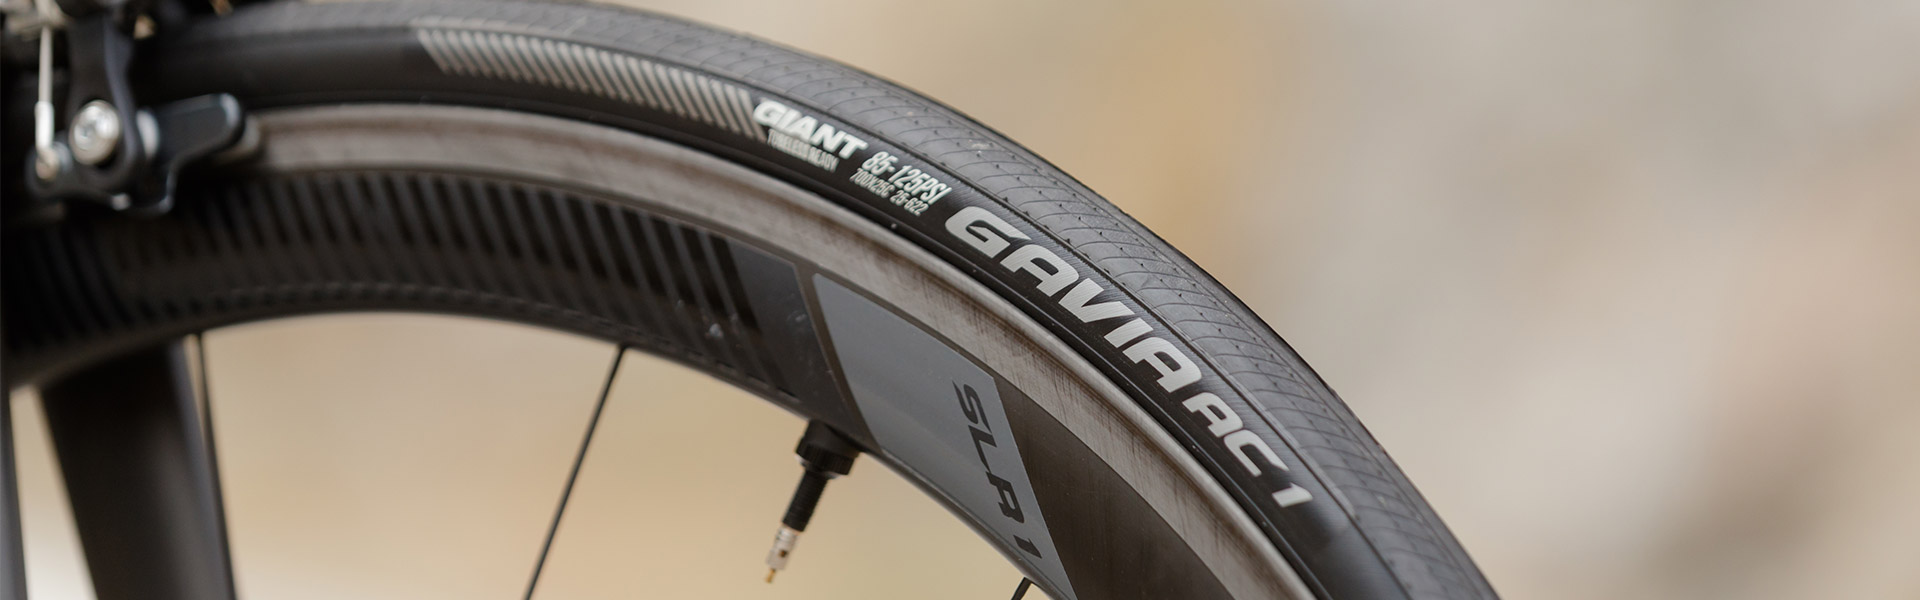 25mm tubeless tyres